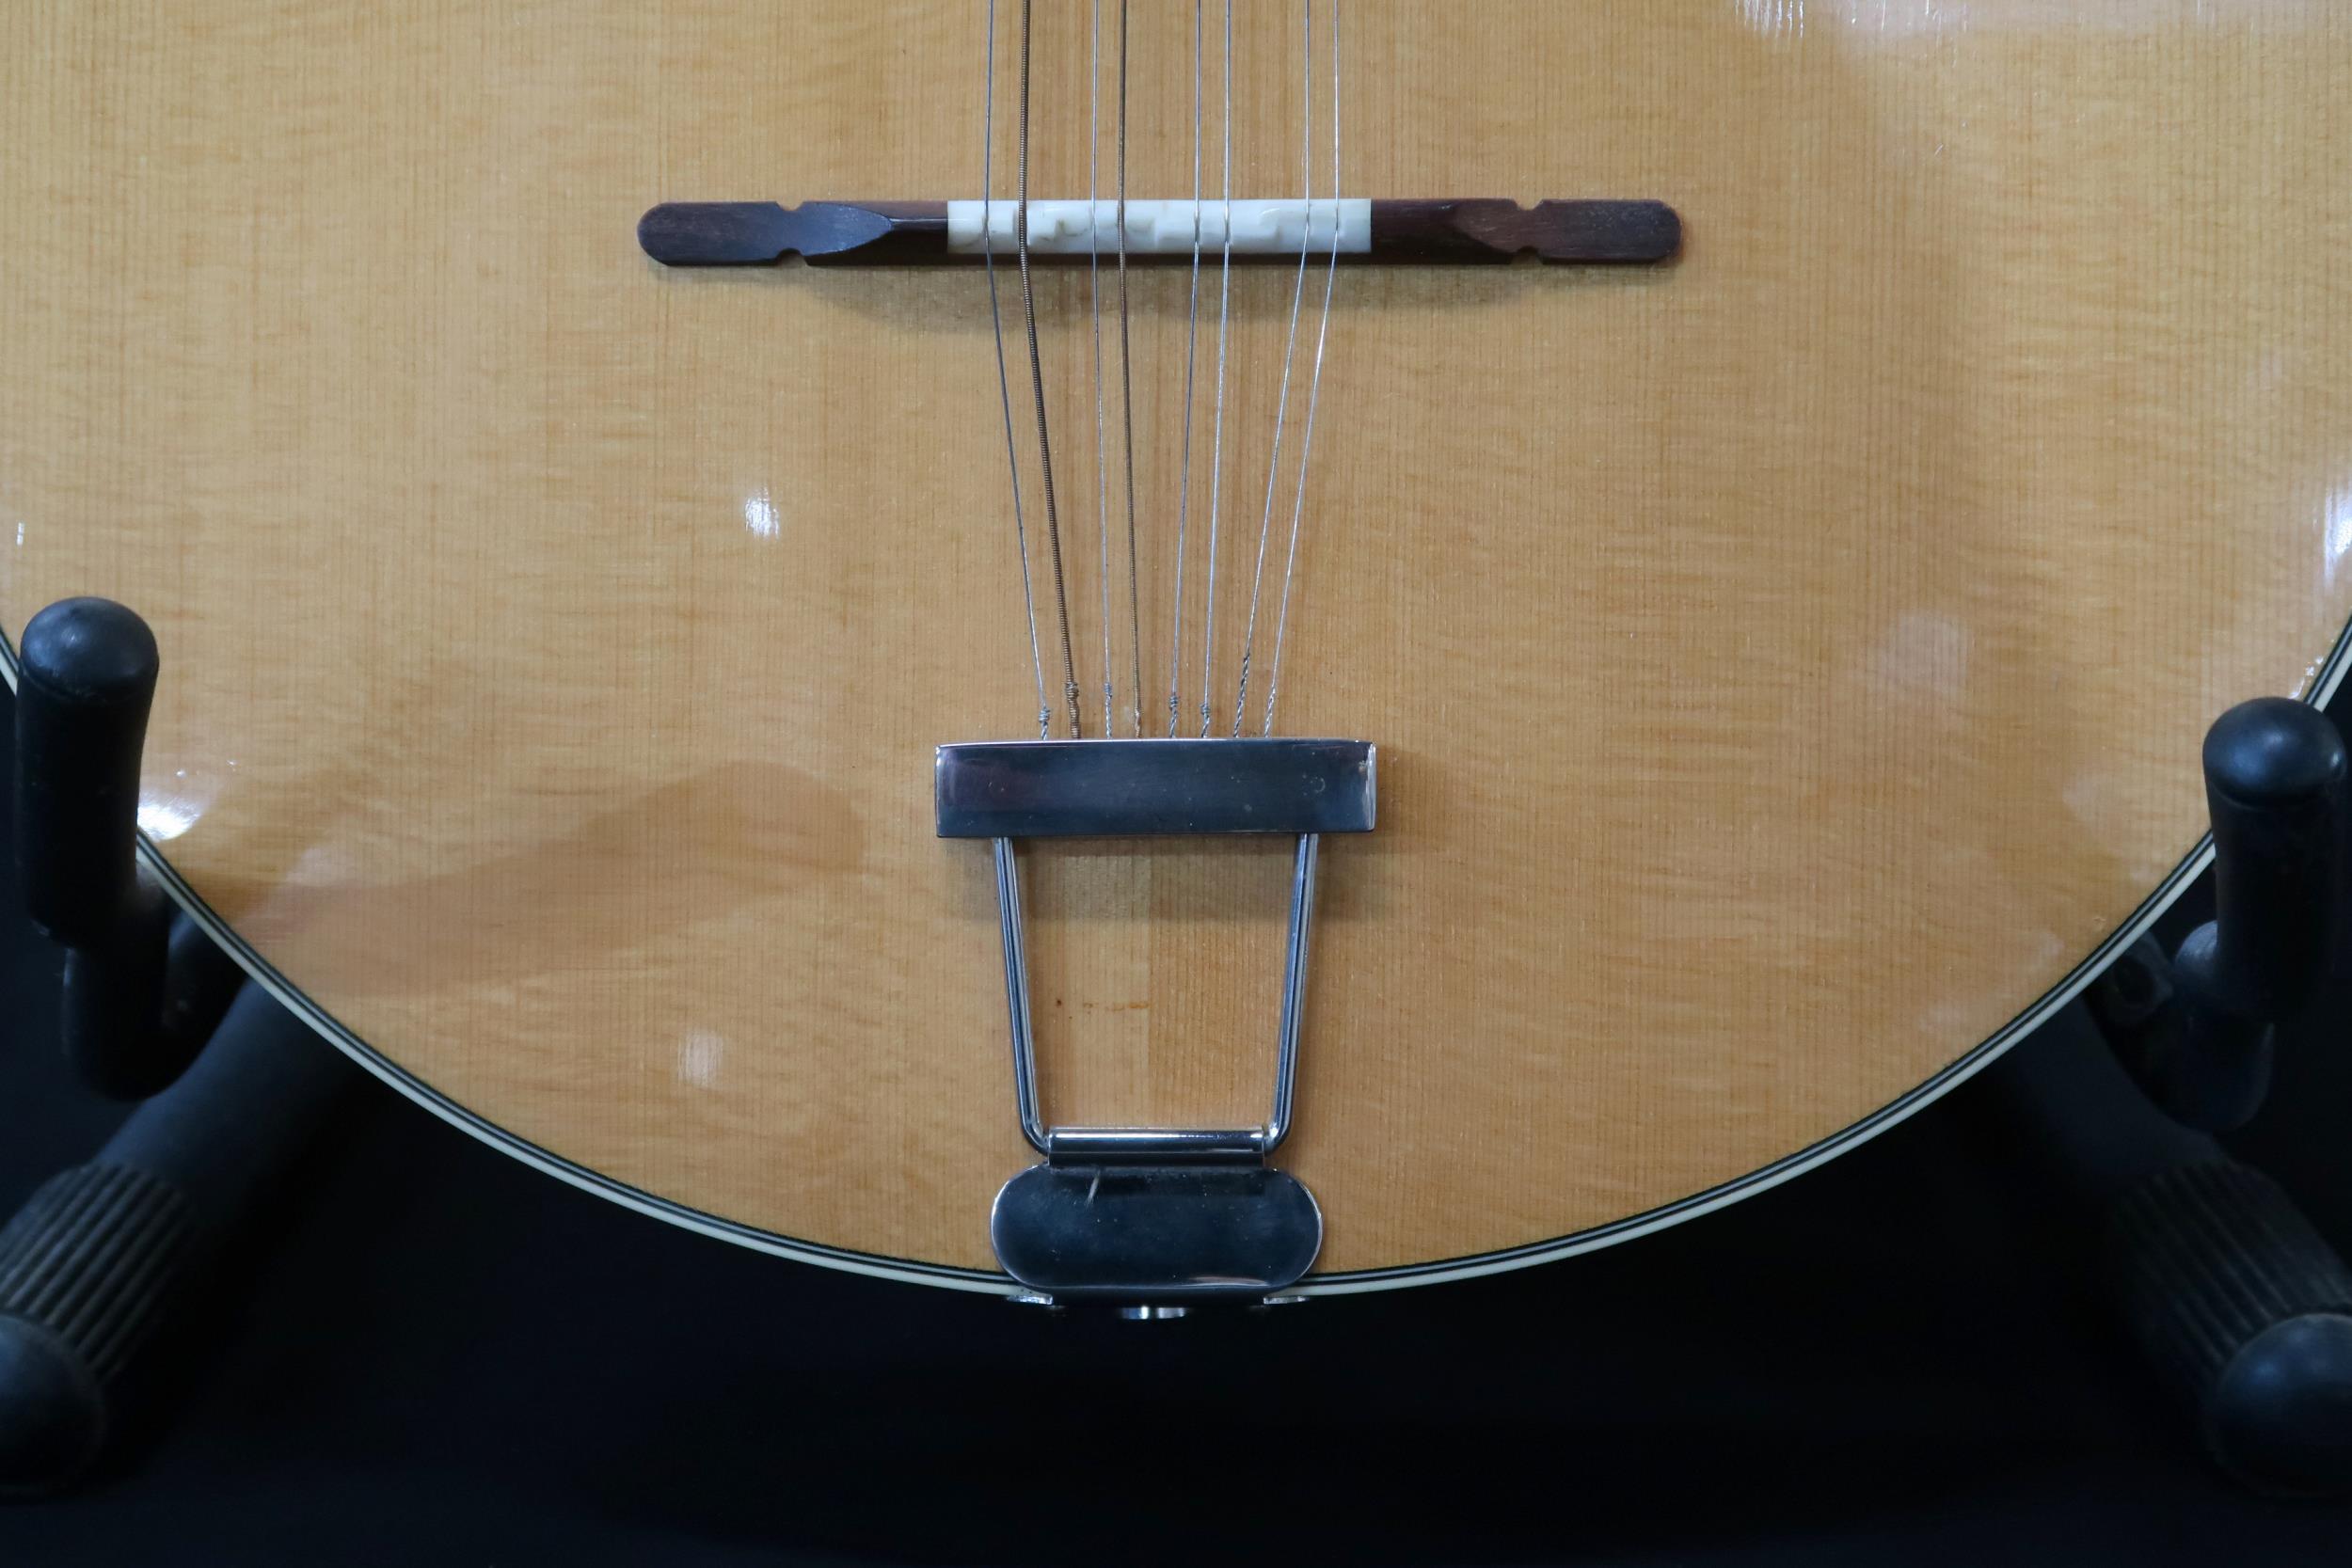 A Kentucky bouzouki mandolin 24 frets model KM-004 serial number 18514 bearing label to the interior - Image 4 of 16